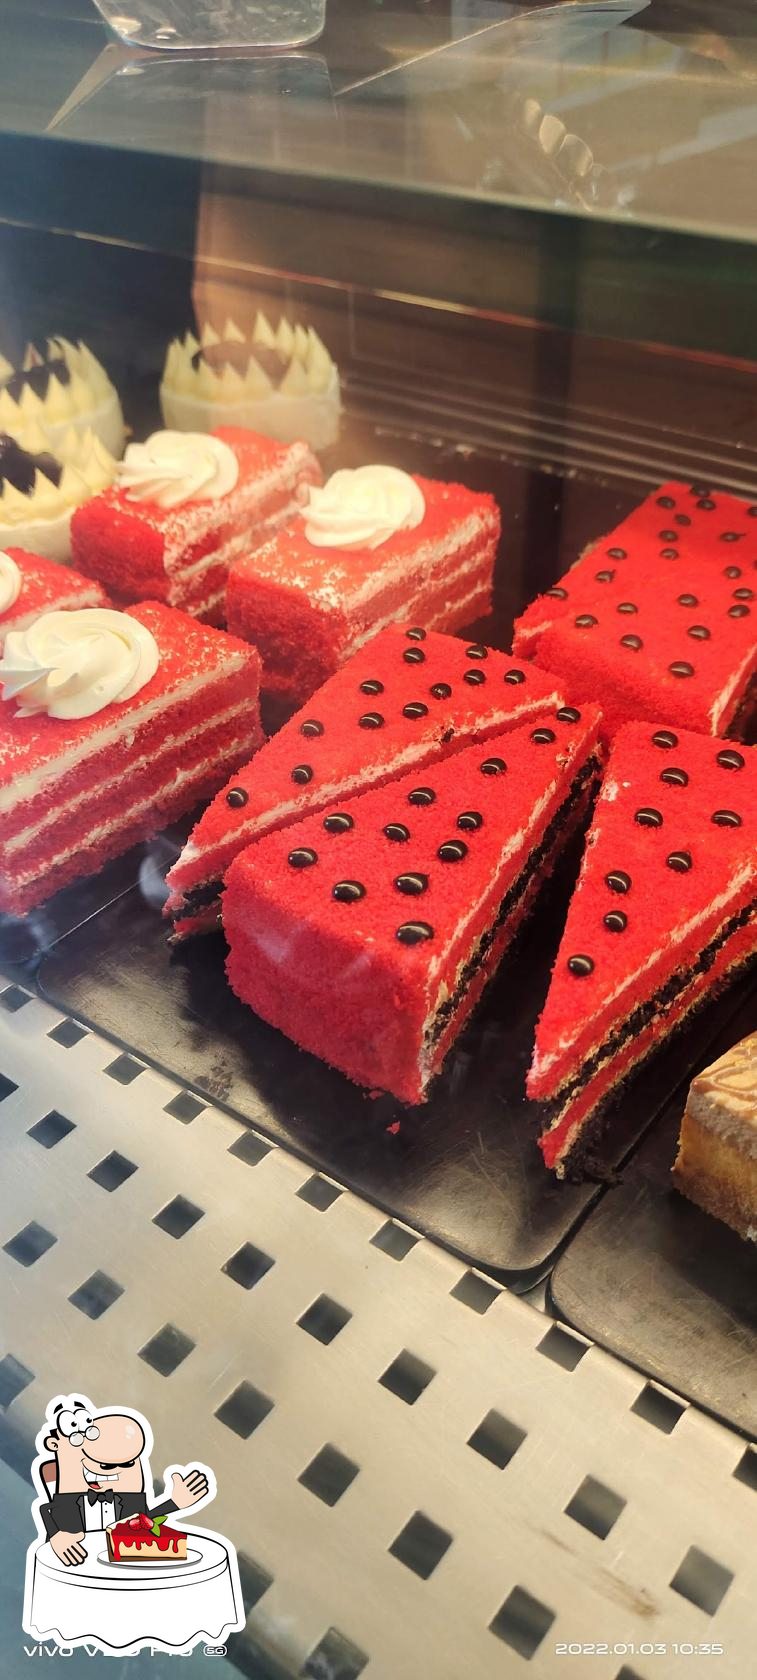 Craving some sweets? Here are a few shops to order cake in Mumbai